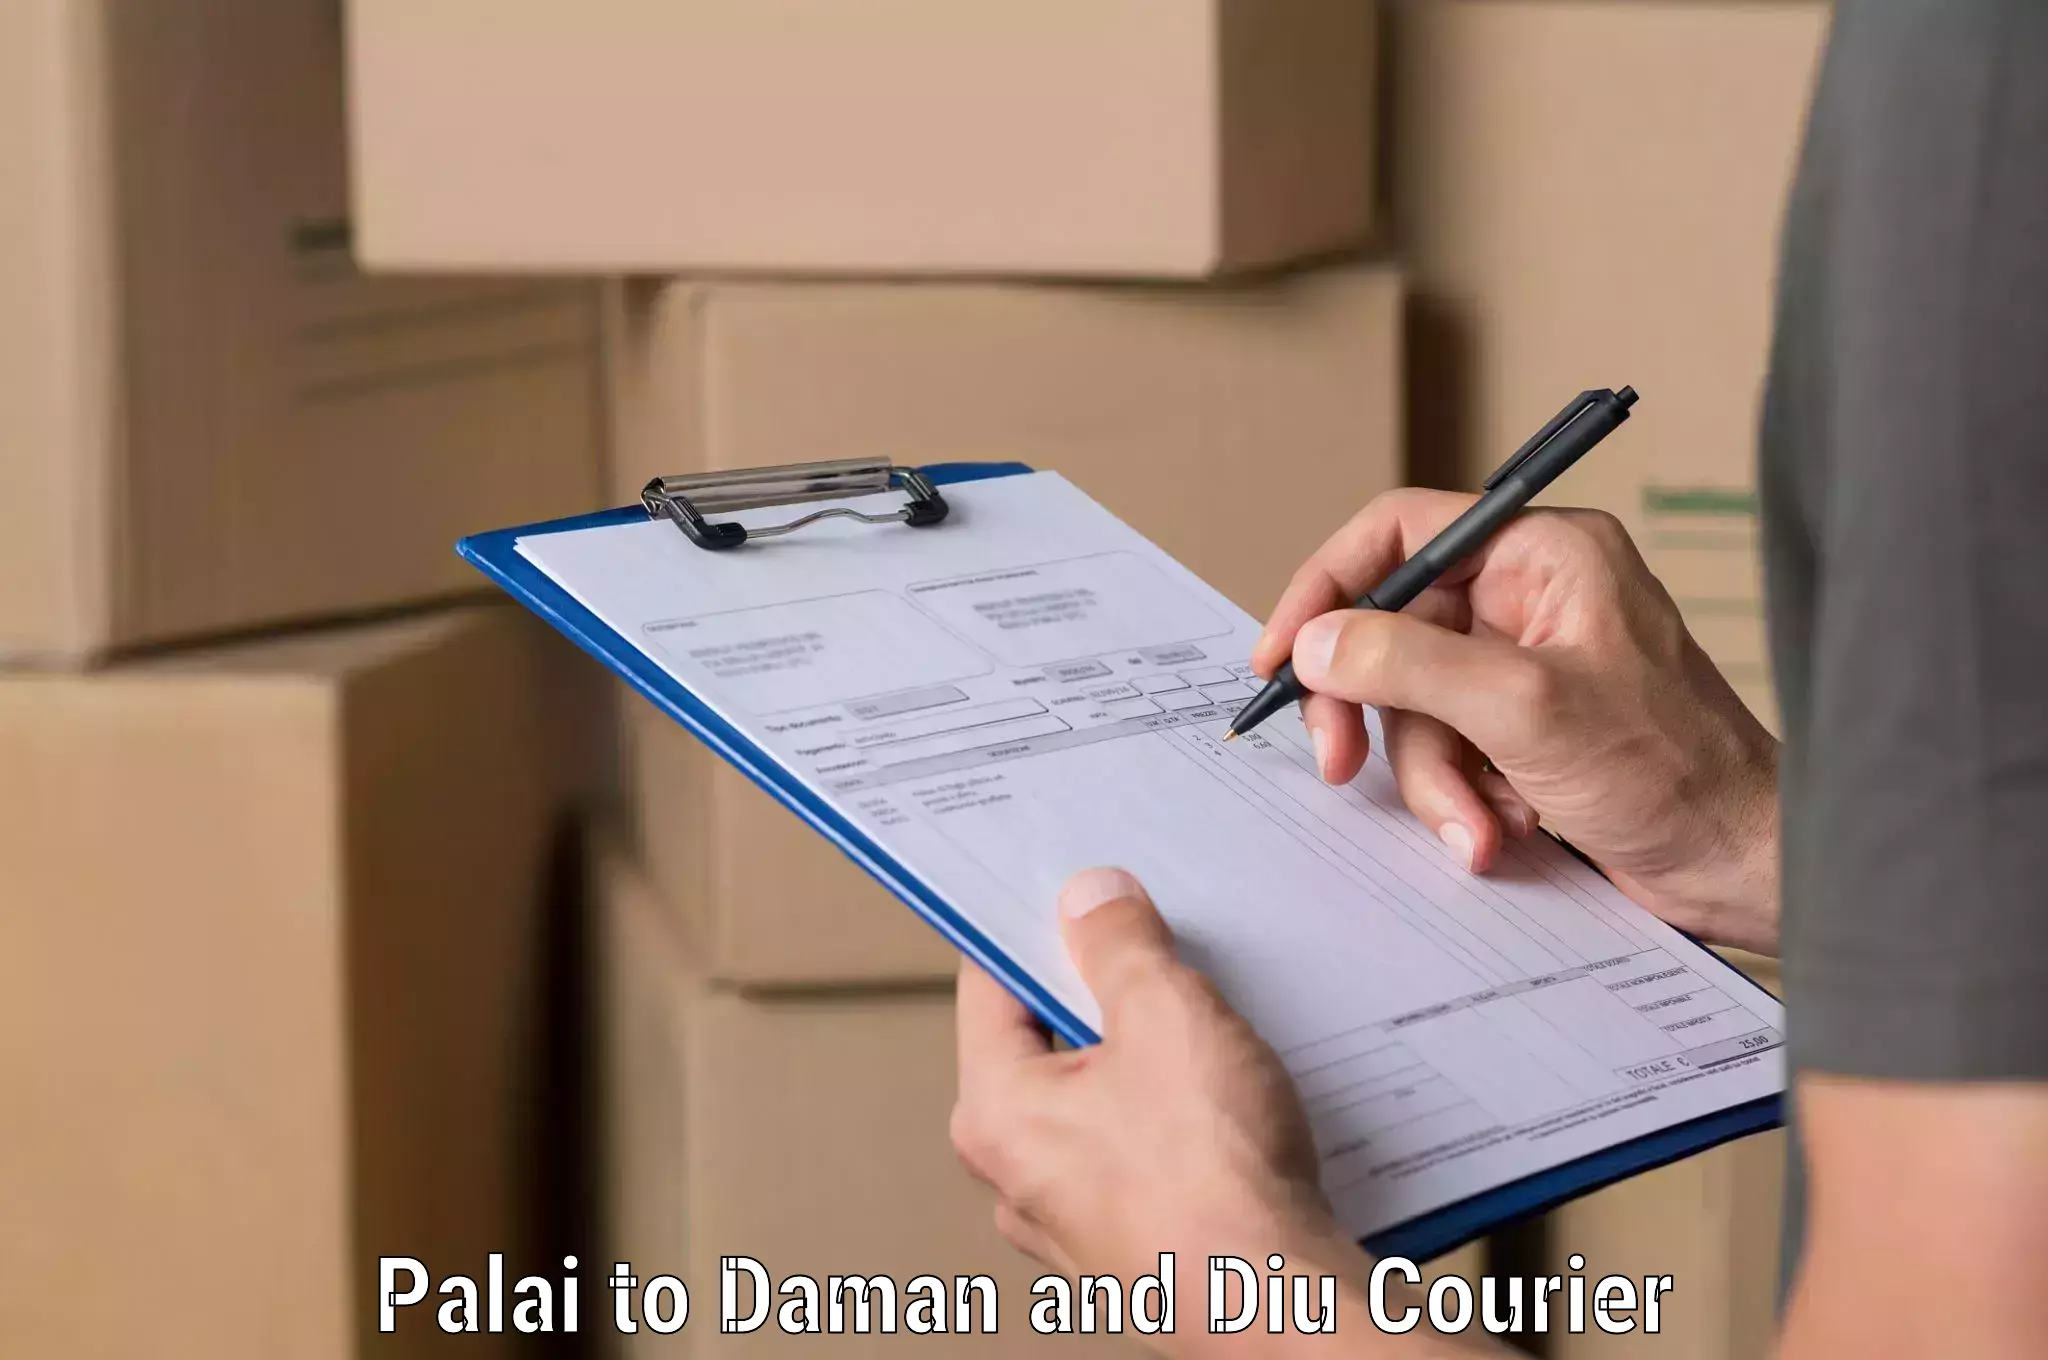 Nationwide delivery network Palai to Daman